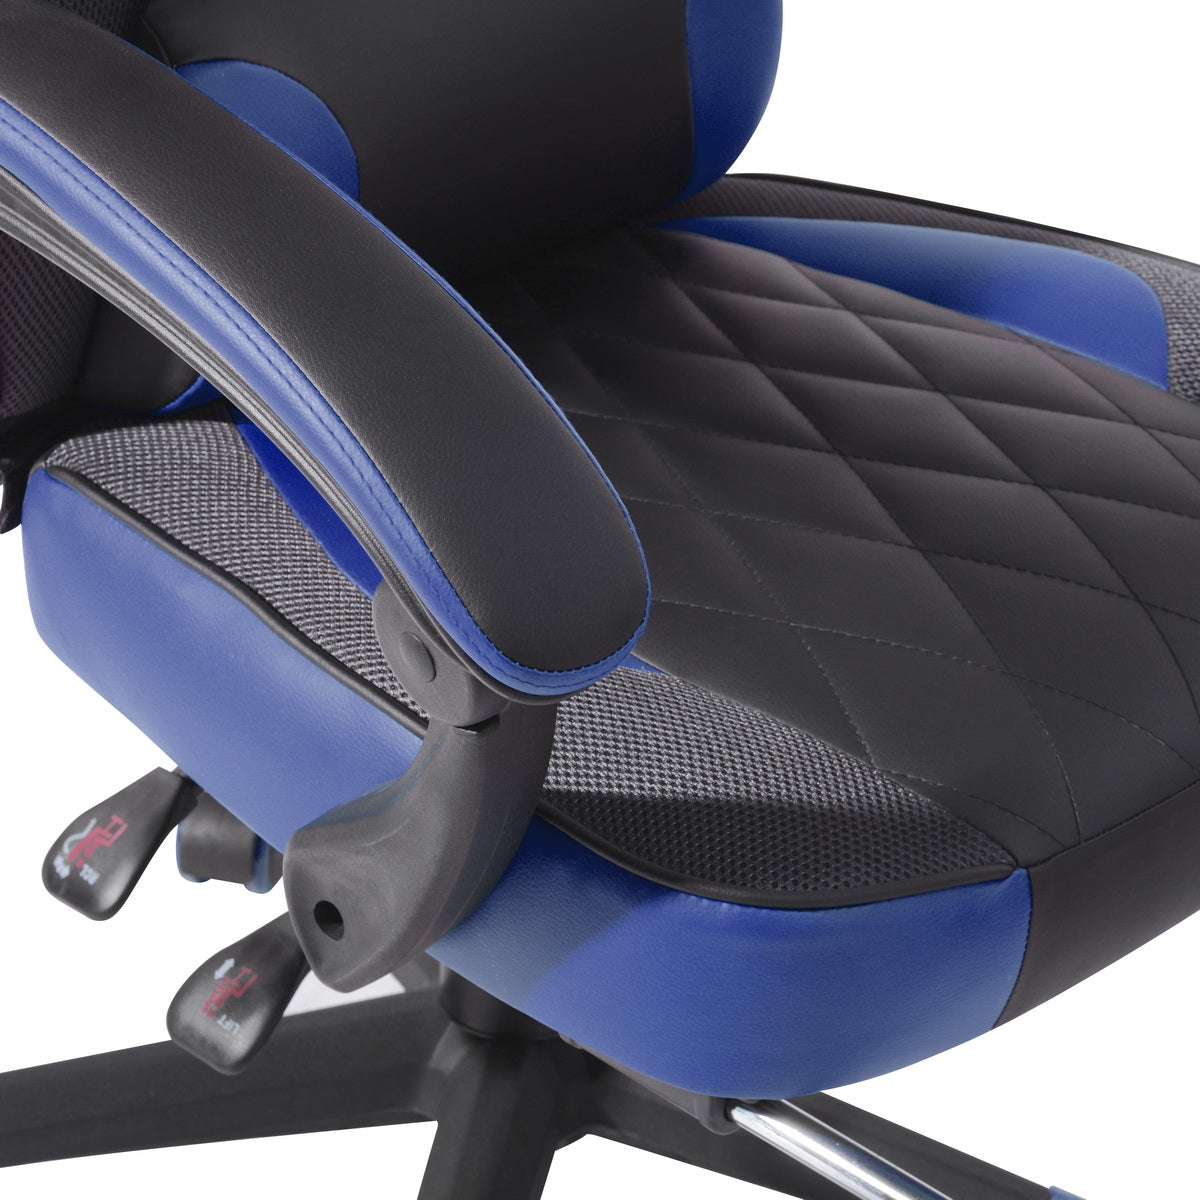 Padded PU Upholstery Foldable Armrest Gaming Chair, Burgendy Blue